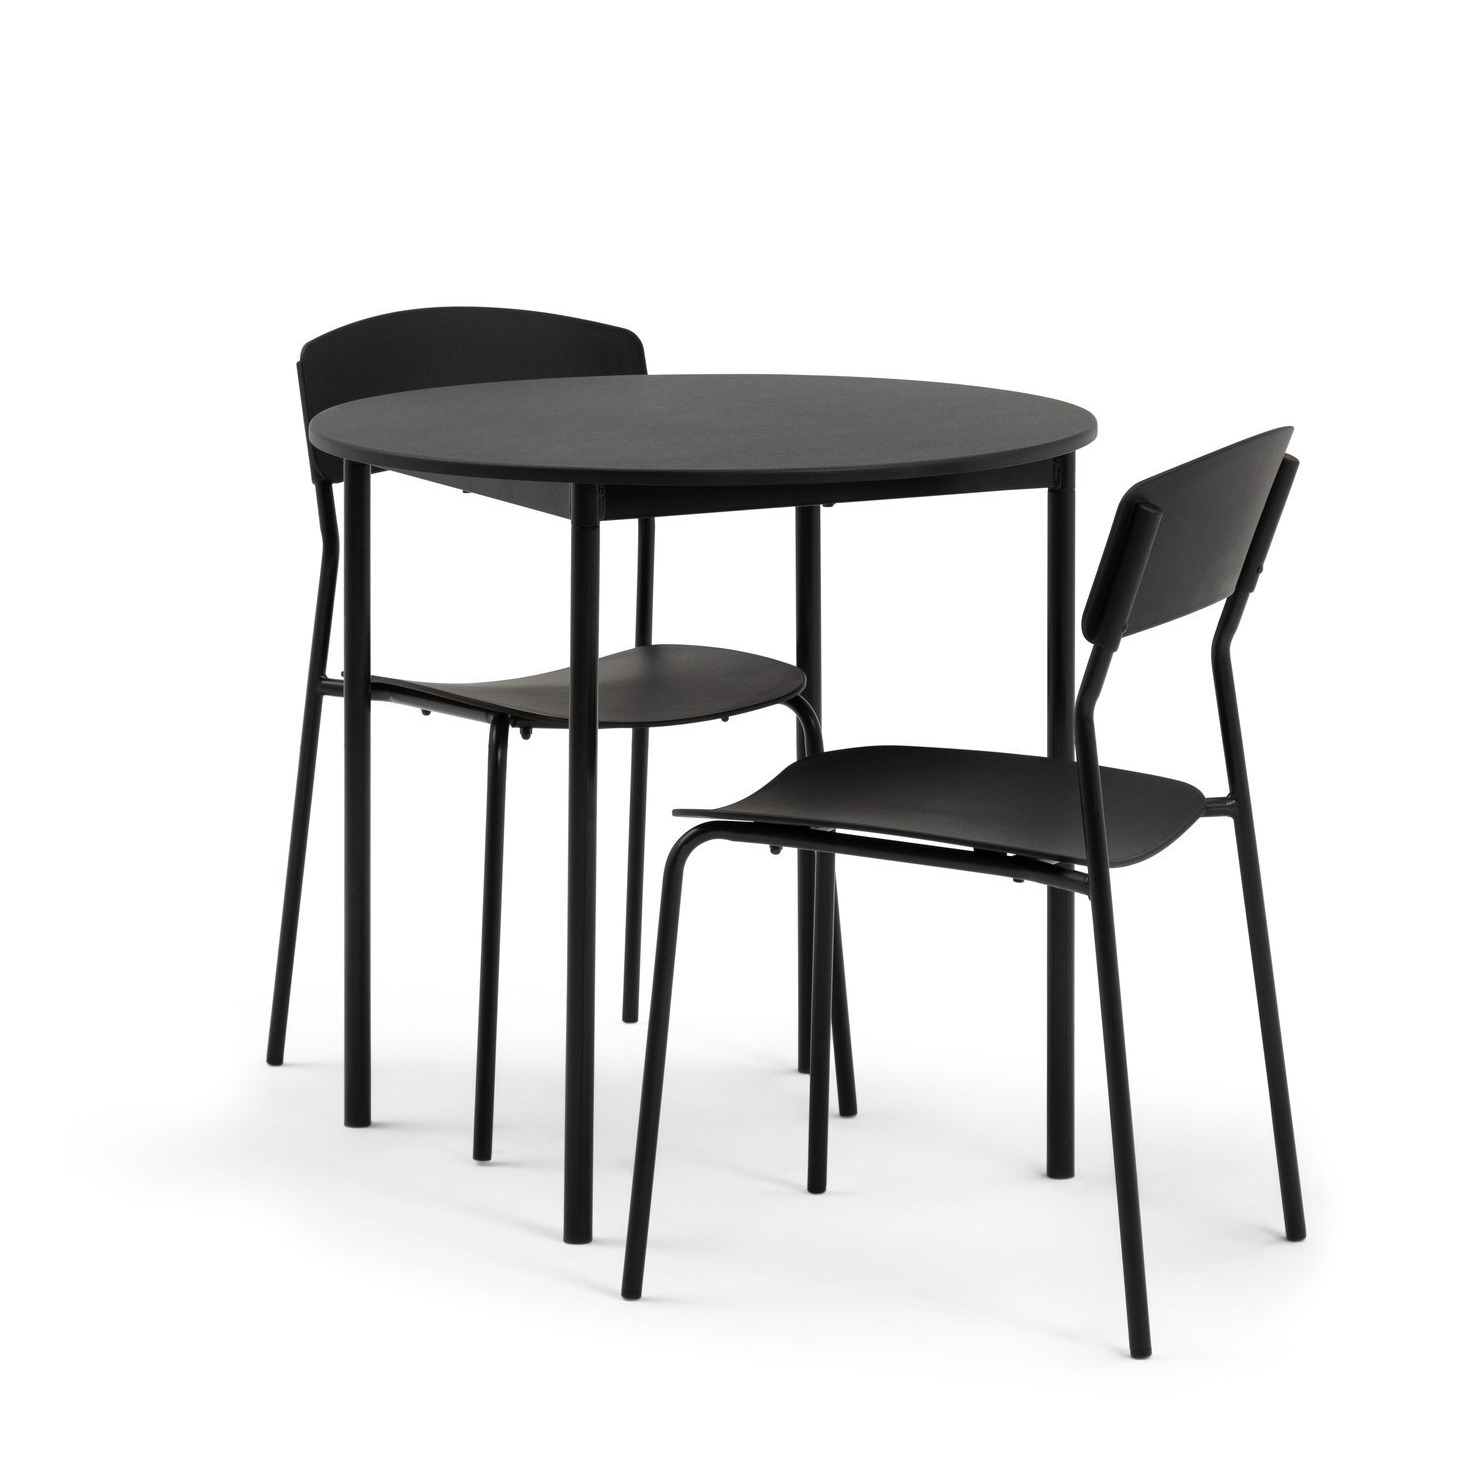 Argos Home Stella Wood Effect Dining Table & 2 Black Chairs - image 1